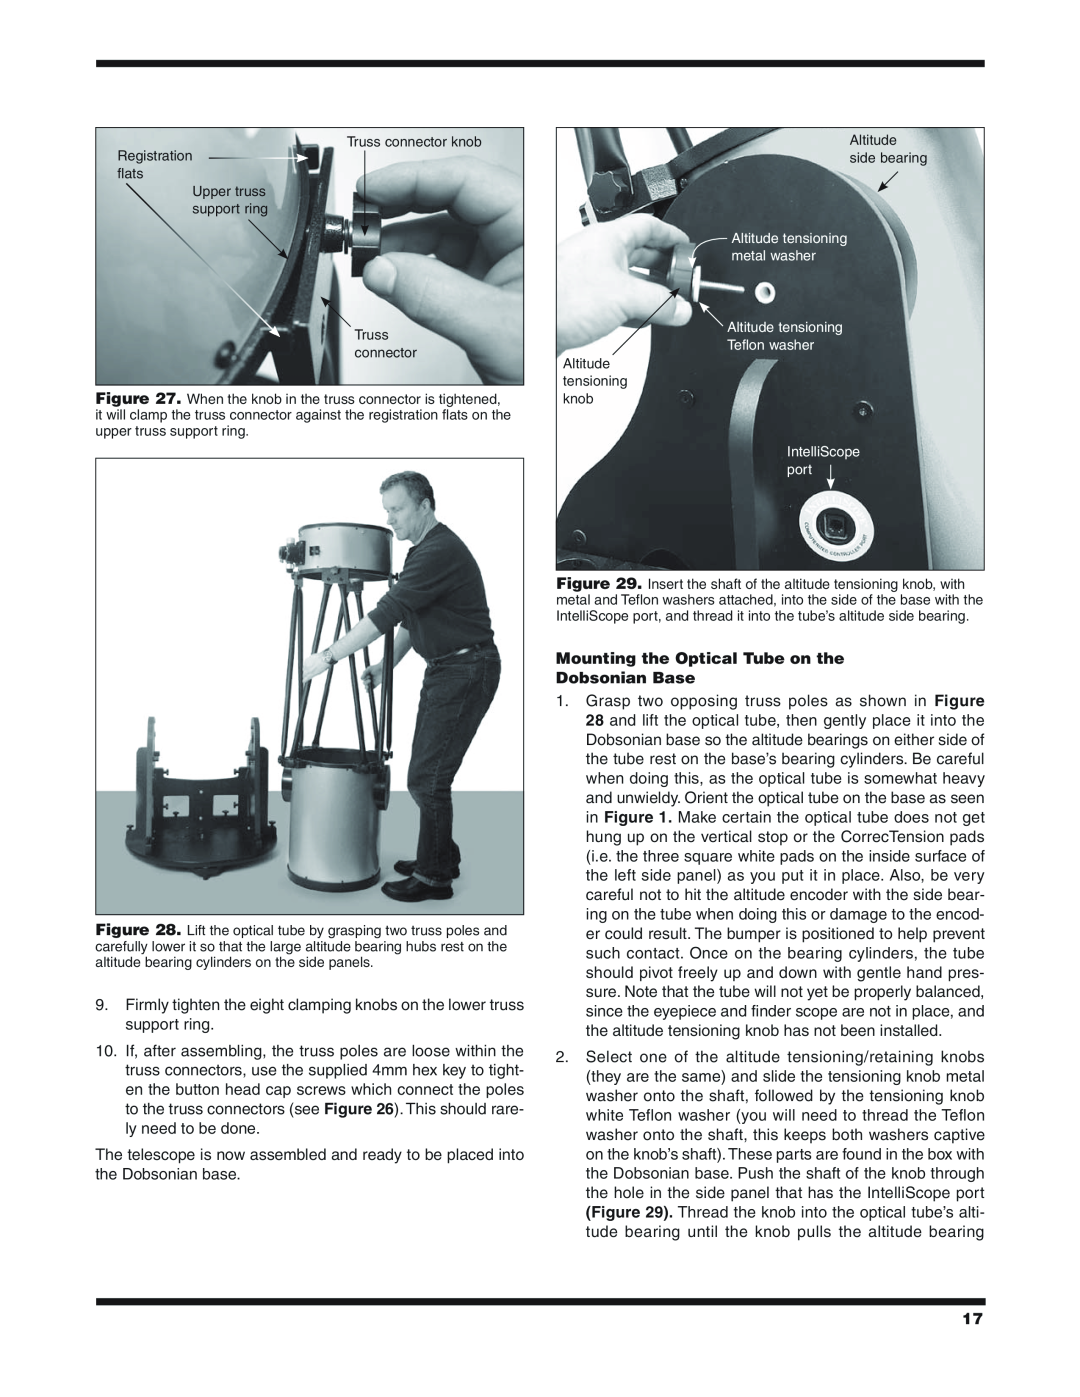 Orion 9791 instruction manual Mounting the Optical Tube on the Dobsonian Base 